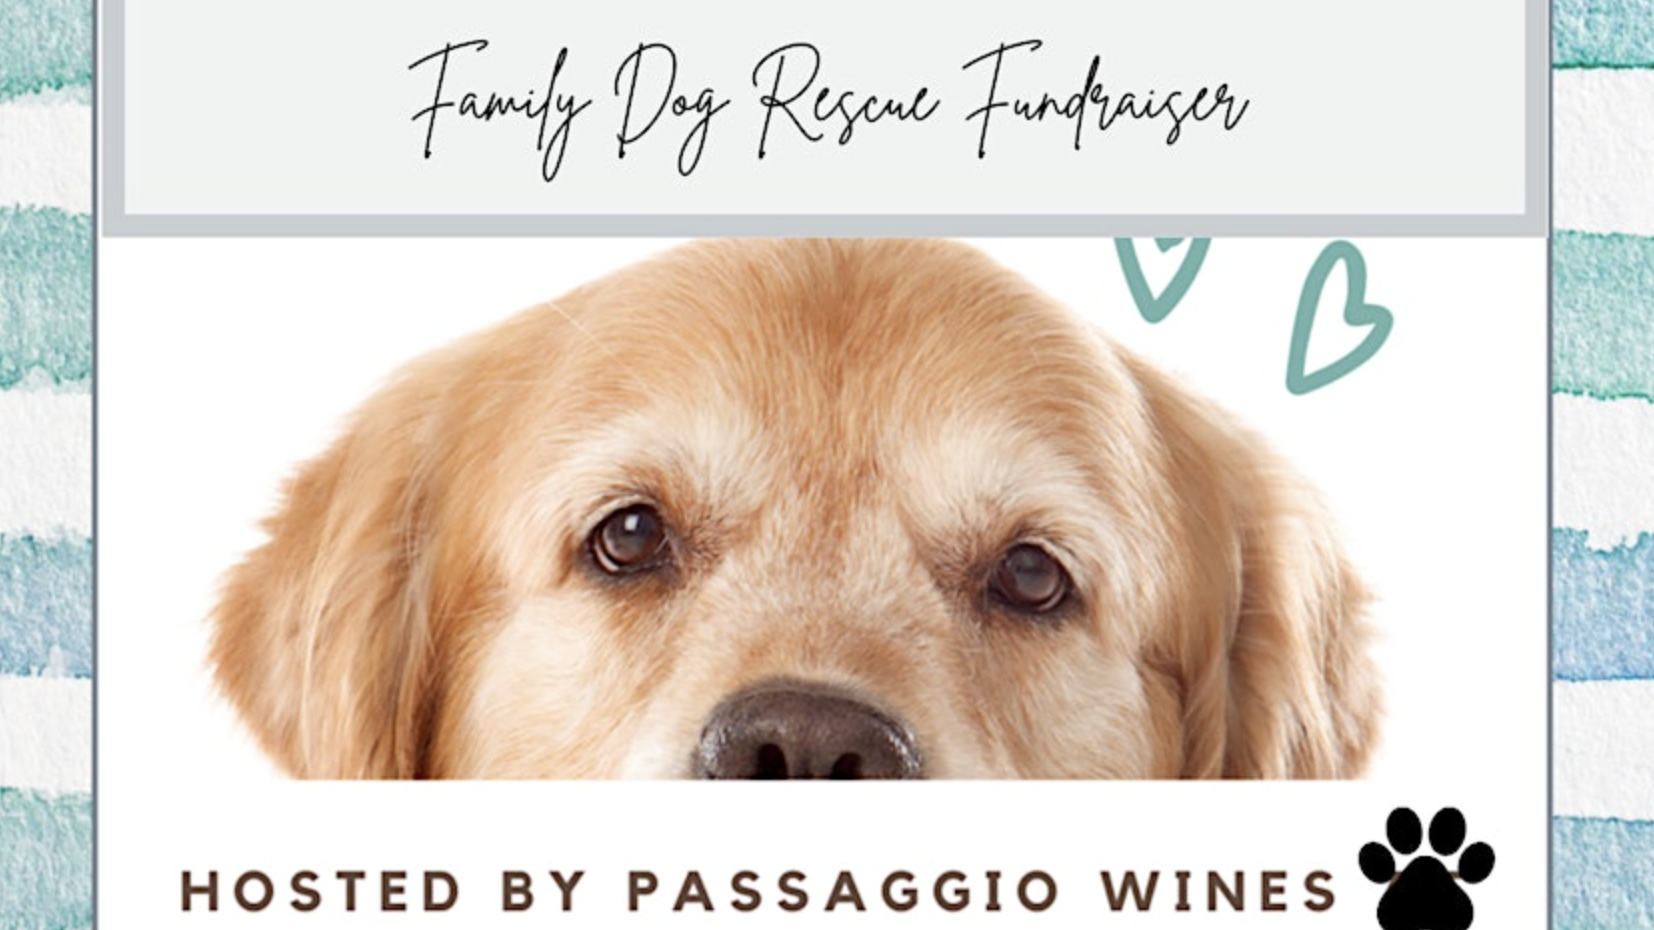 Eye-catching banner showcasing an adorable Golden Retriever, prominently sharing the dates and details of Passaggio Wines' forthcoming "Family Dog Rescue" fundraising event.